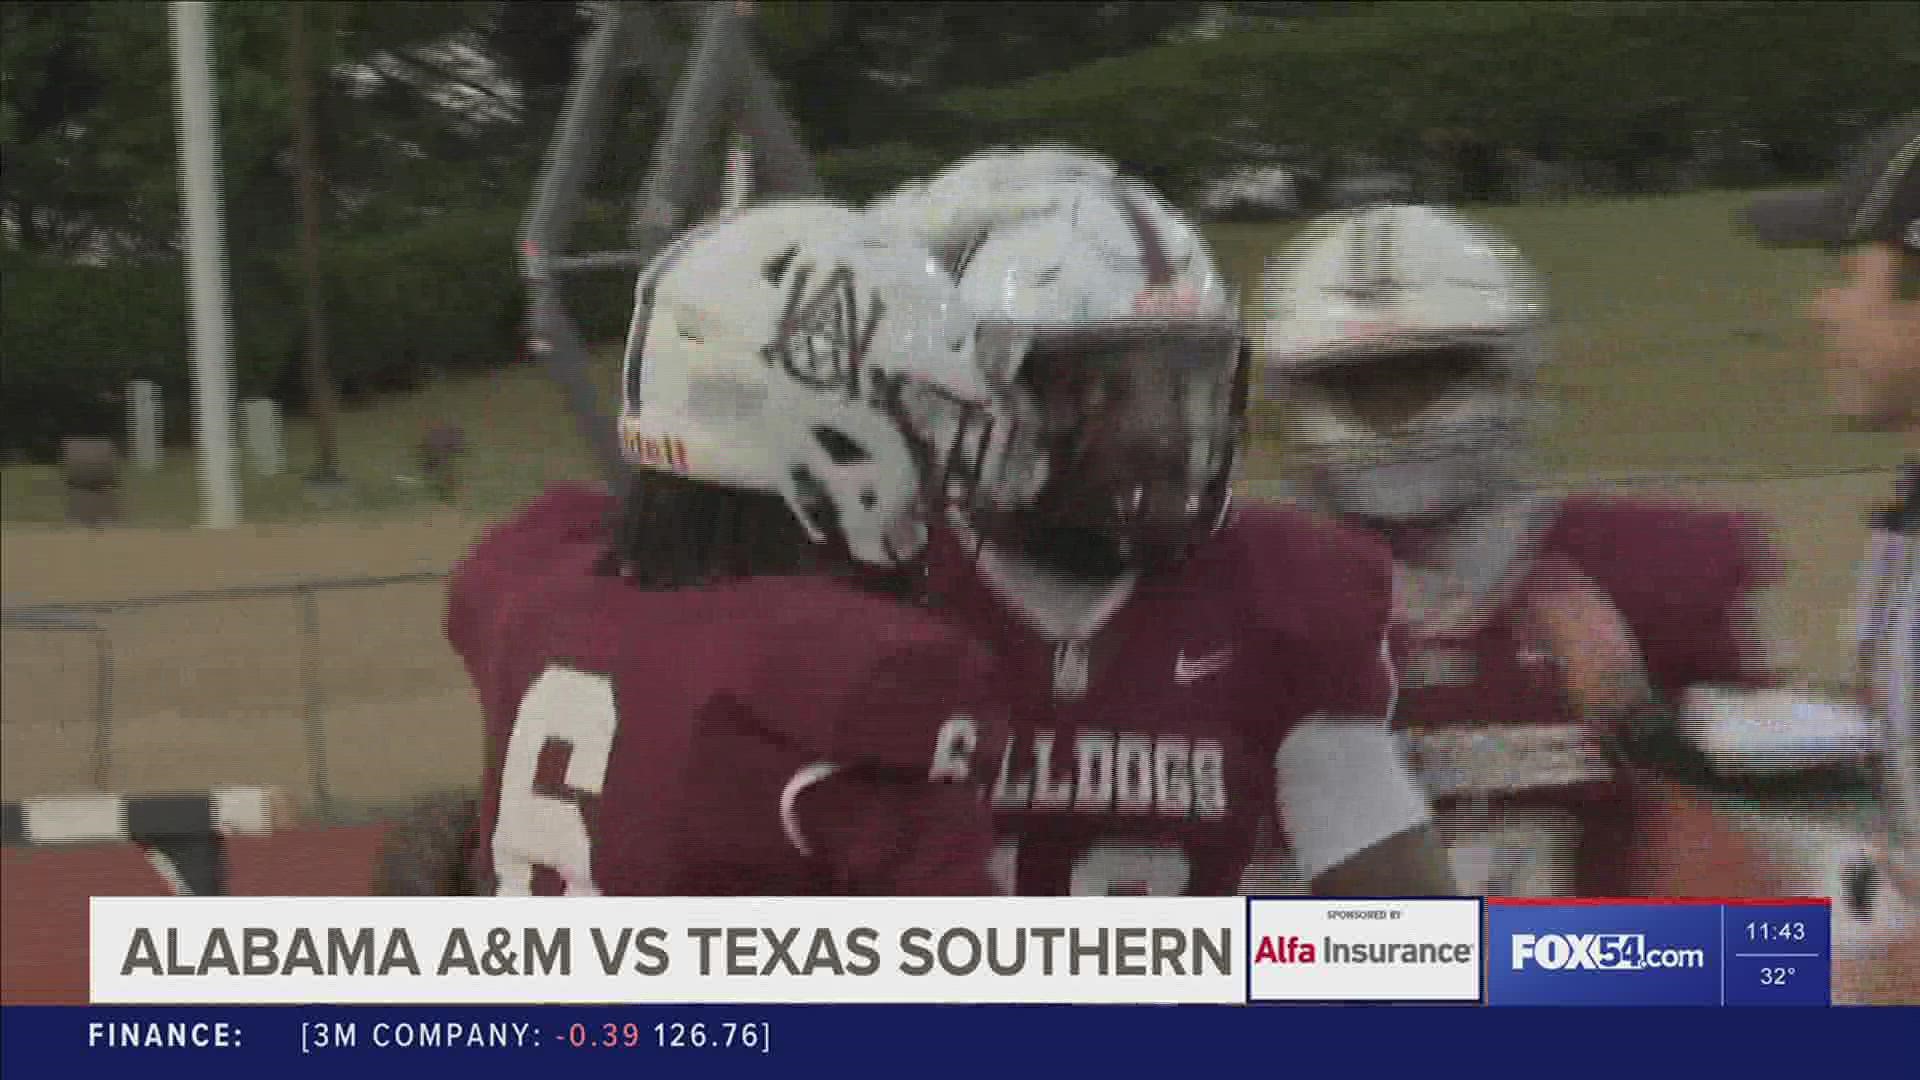 FOX54's Nick Kuzma provides highlights from AAMU's thrilling comeback victory over Texas Southern in which the Bulldogs trailed 20-3 in the 4th Quarter